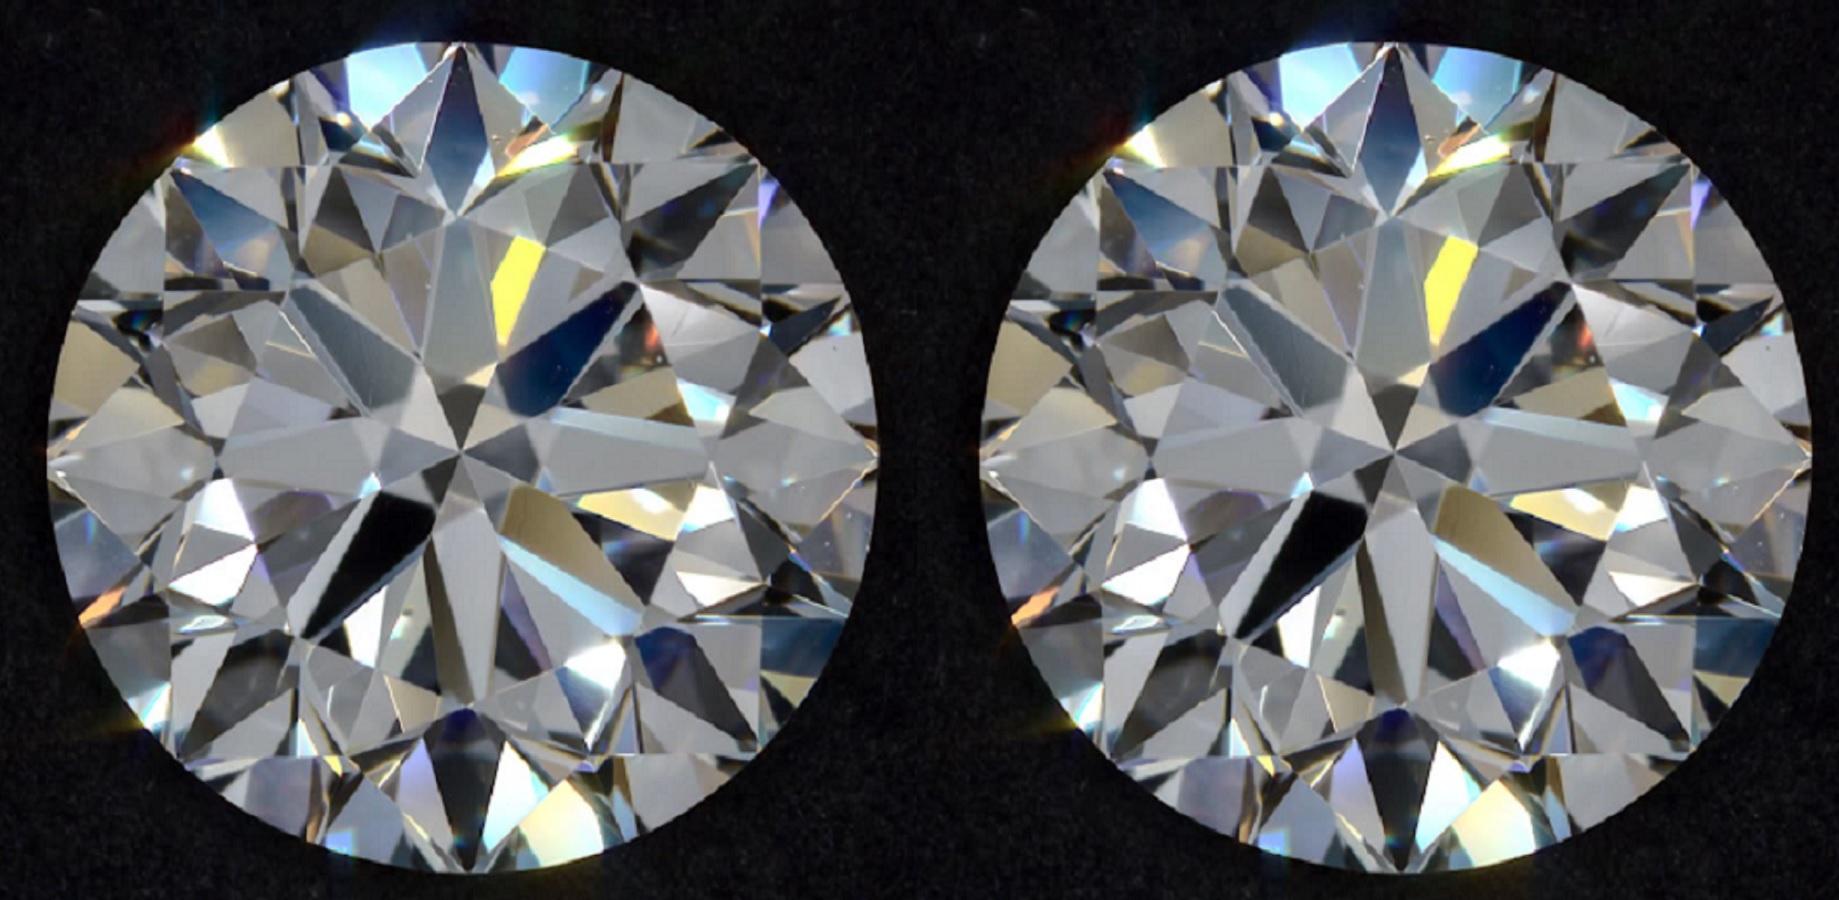 4 carat of pair of round brilliant cut natural diamonds offer fantastic size, beautiful white color, a clean appearance, and a lively play of light! They are 100% natural earth mined diamonds and have not received any treatments or enhancements of